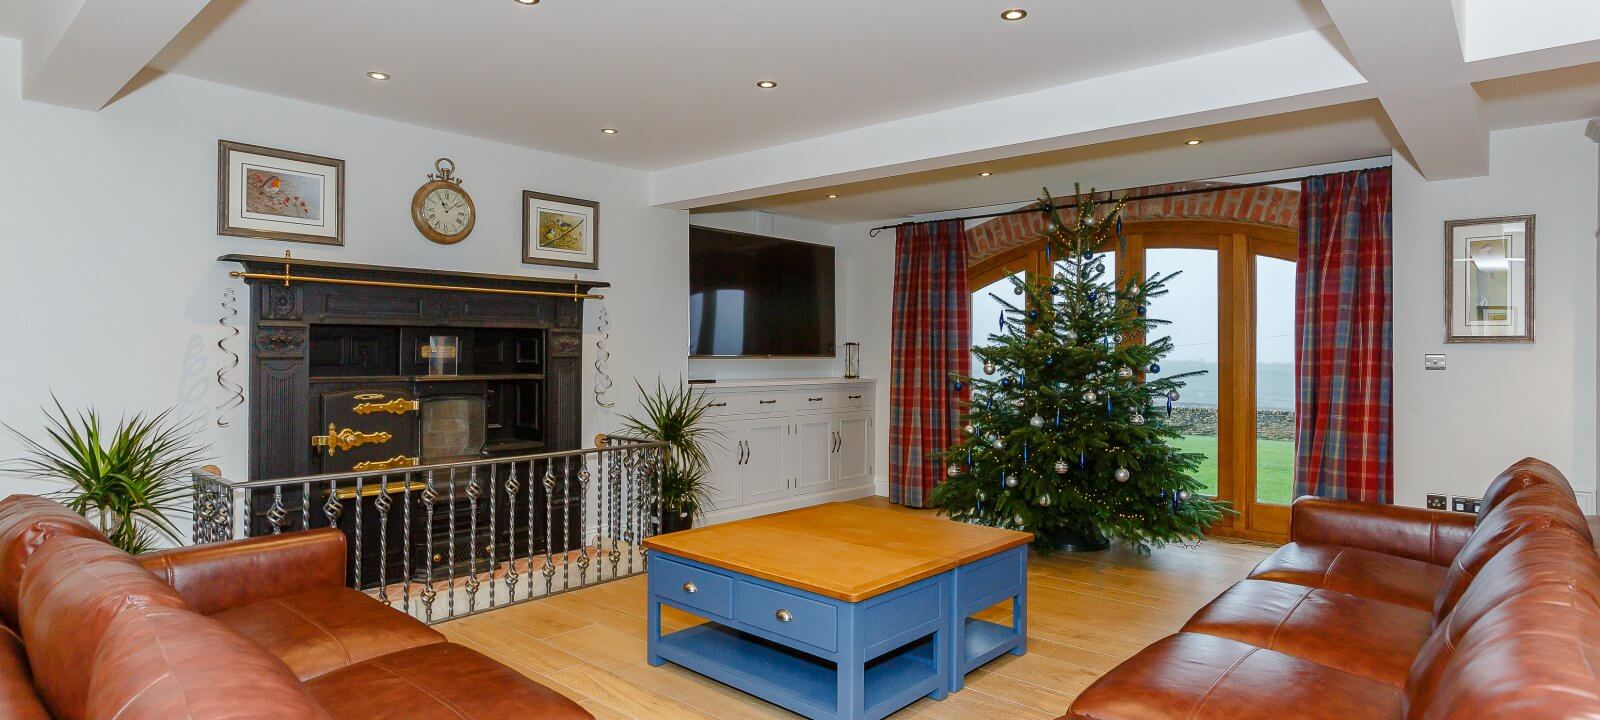 Christmas tree in lounge area of kitchen